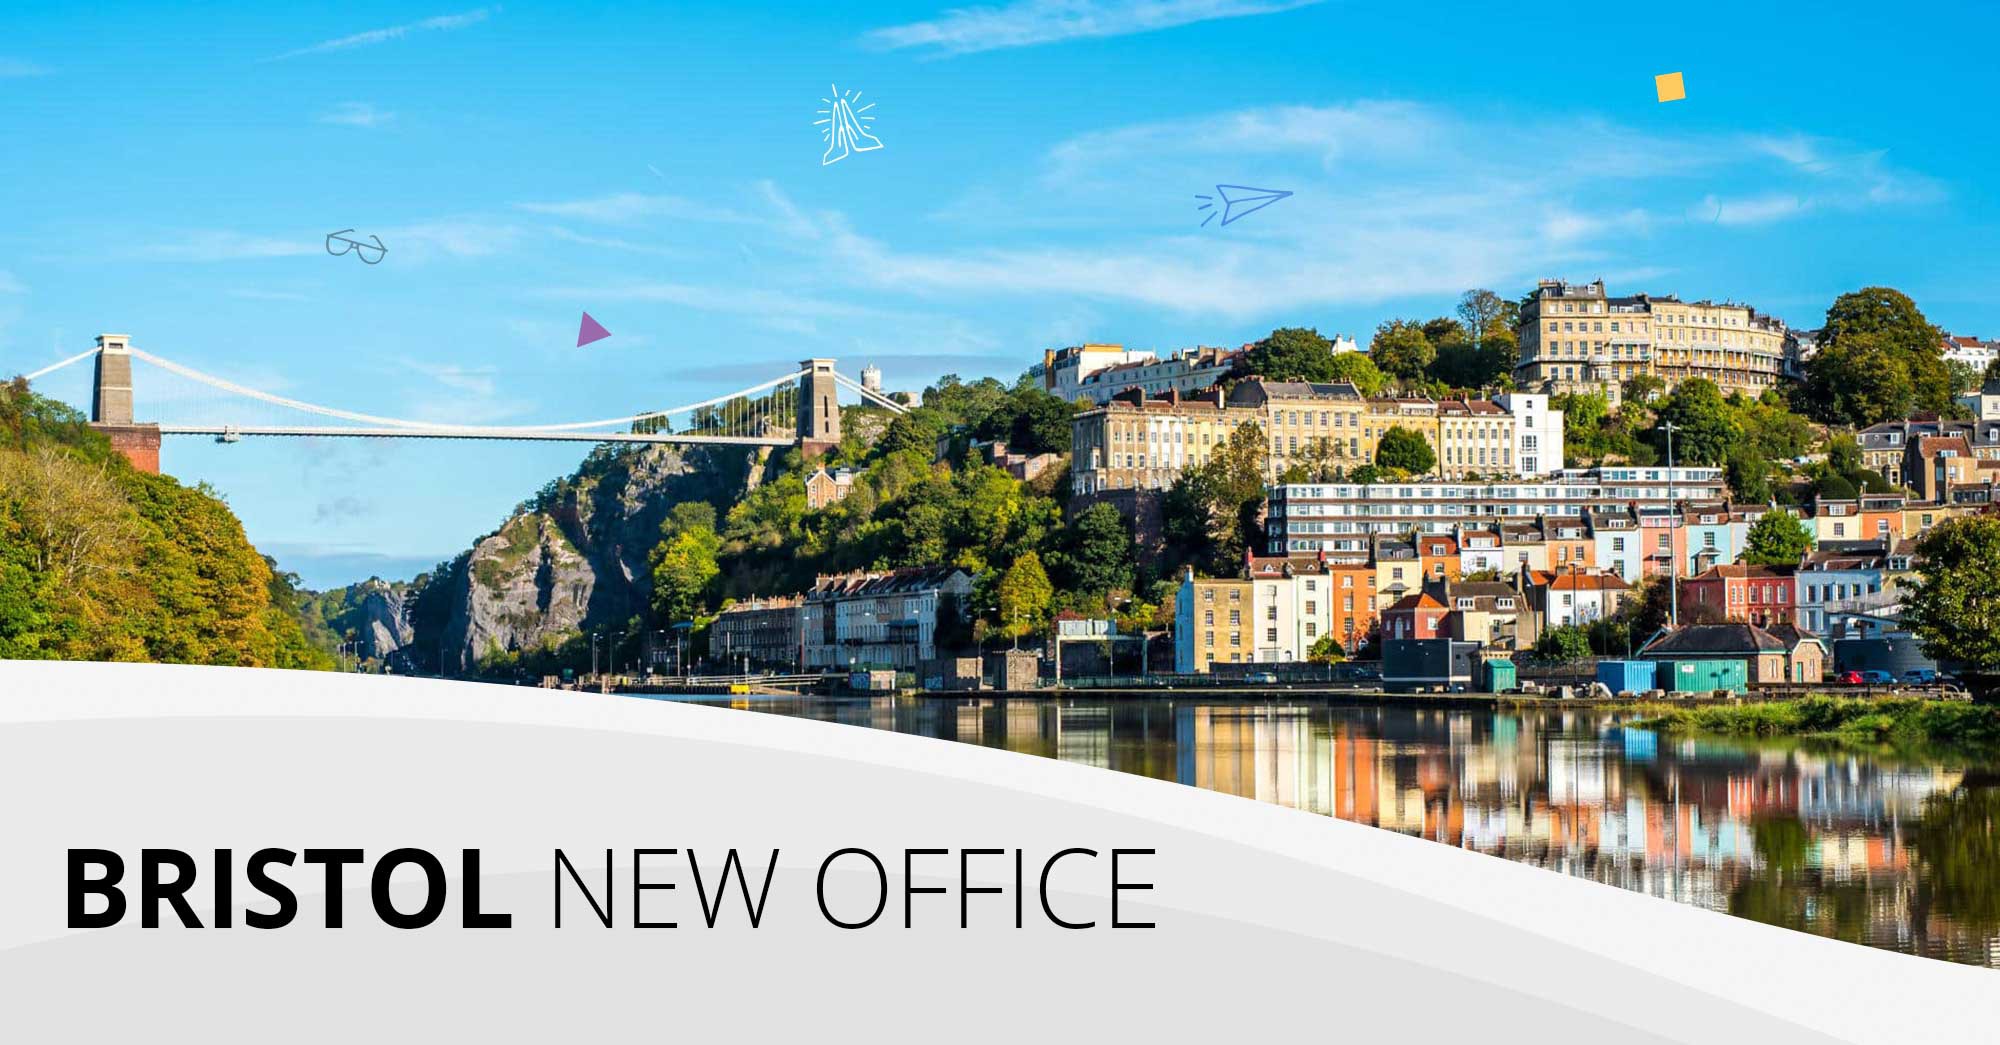 We’ve grown our UK team & opened a new Bristol office!